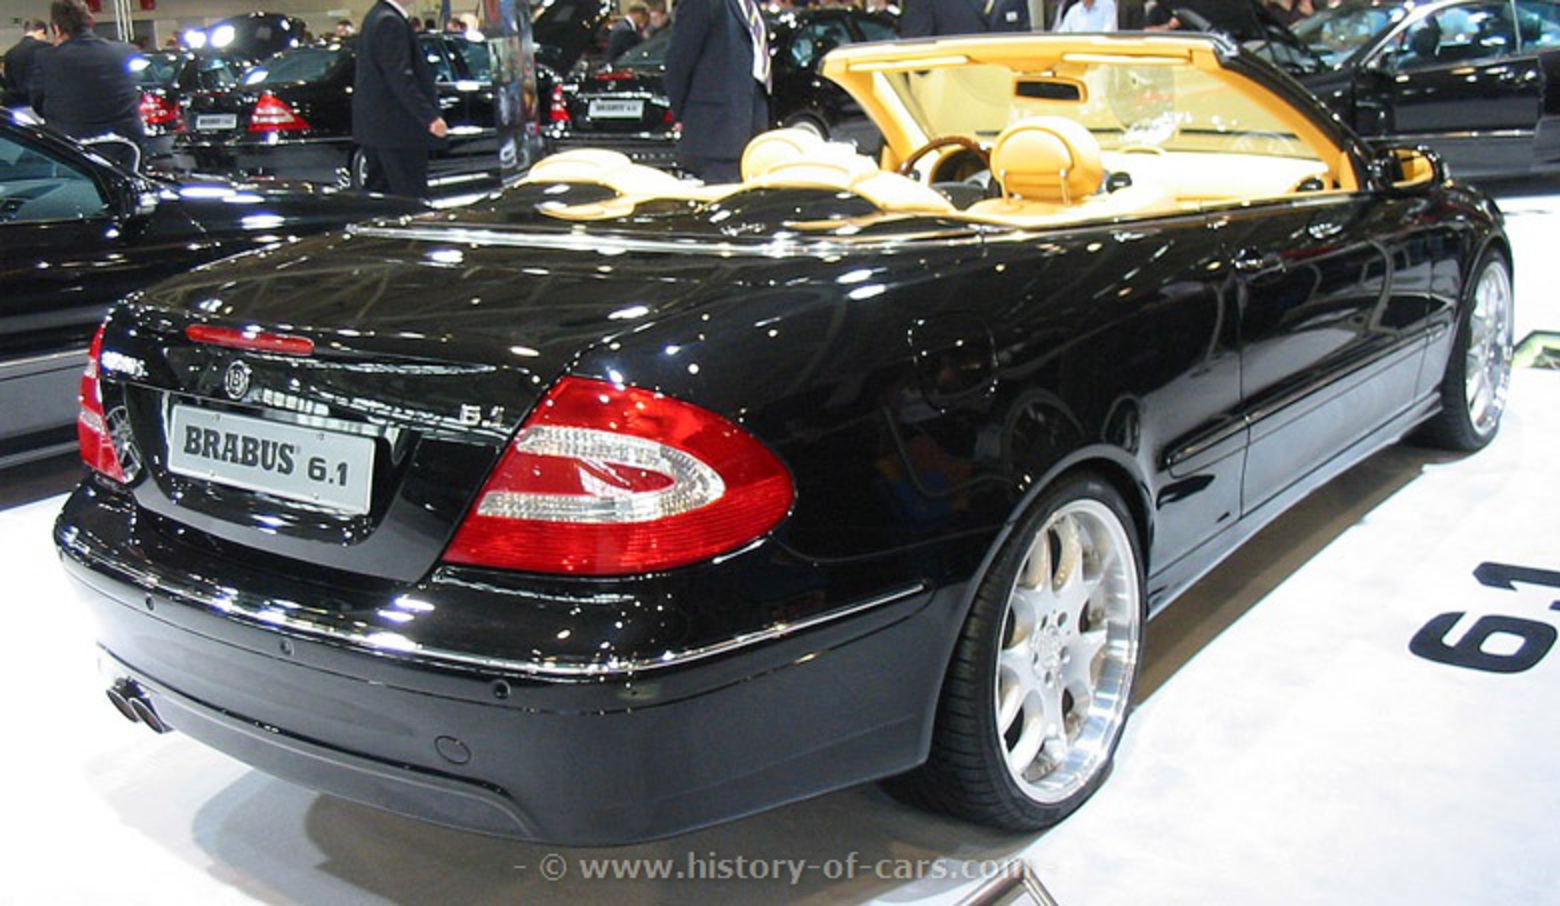 mercedes 2002 a209 clk brabus 61 convertible - the history of cars ...